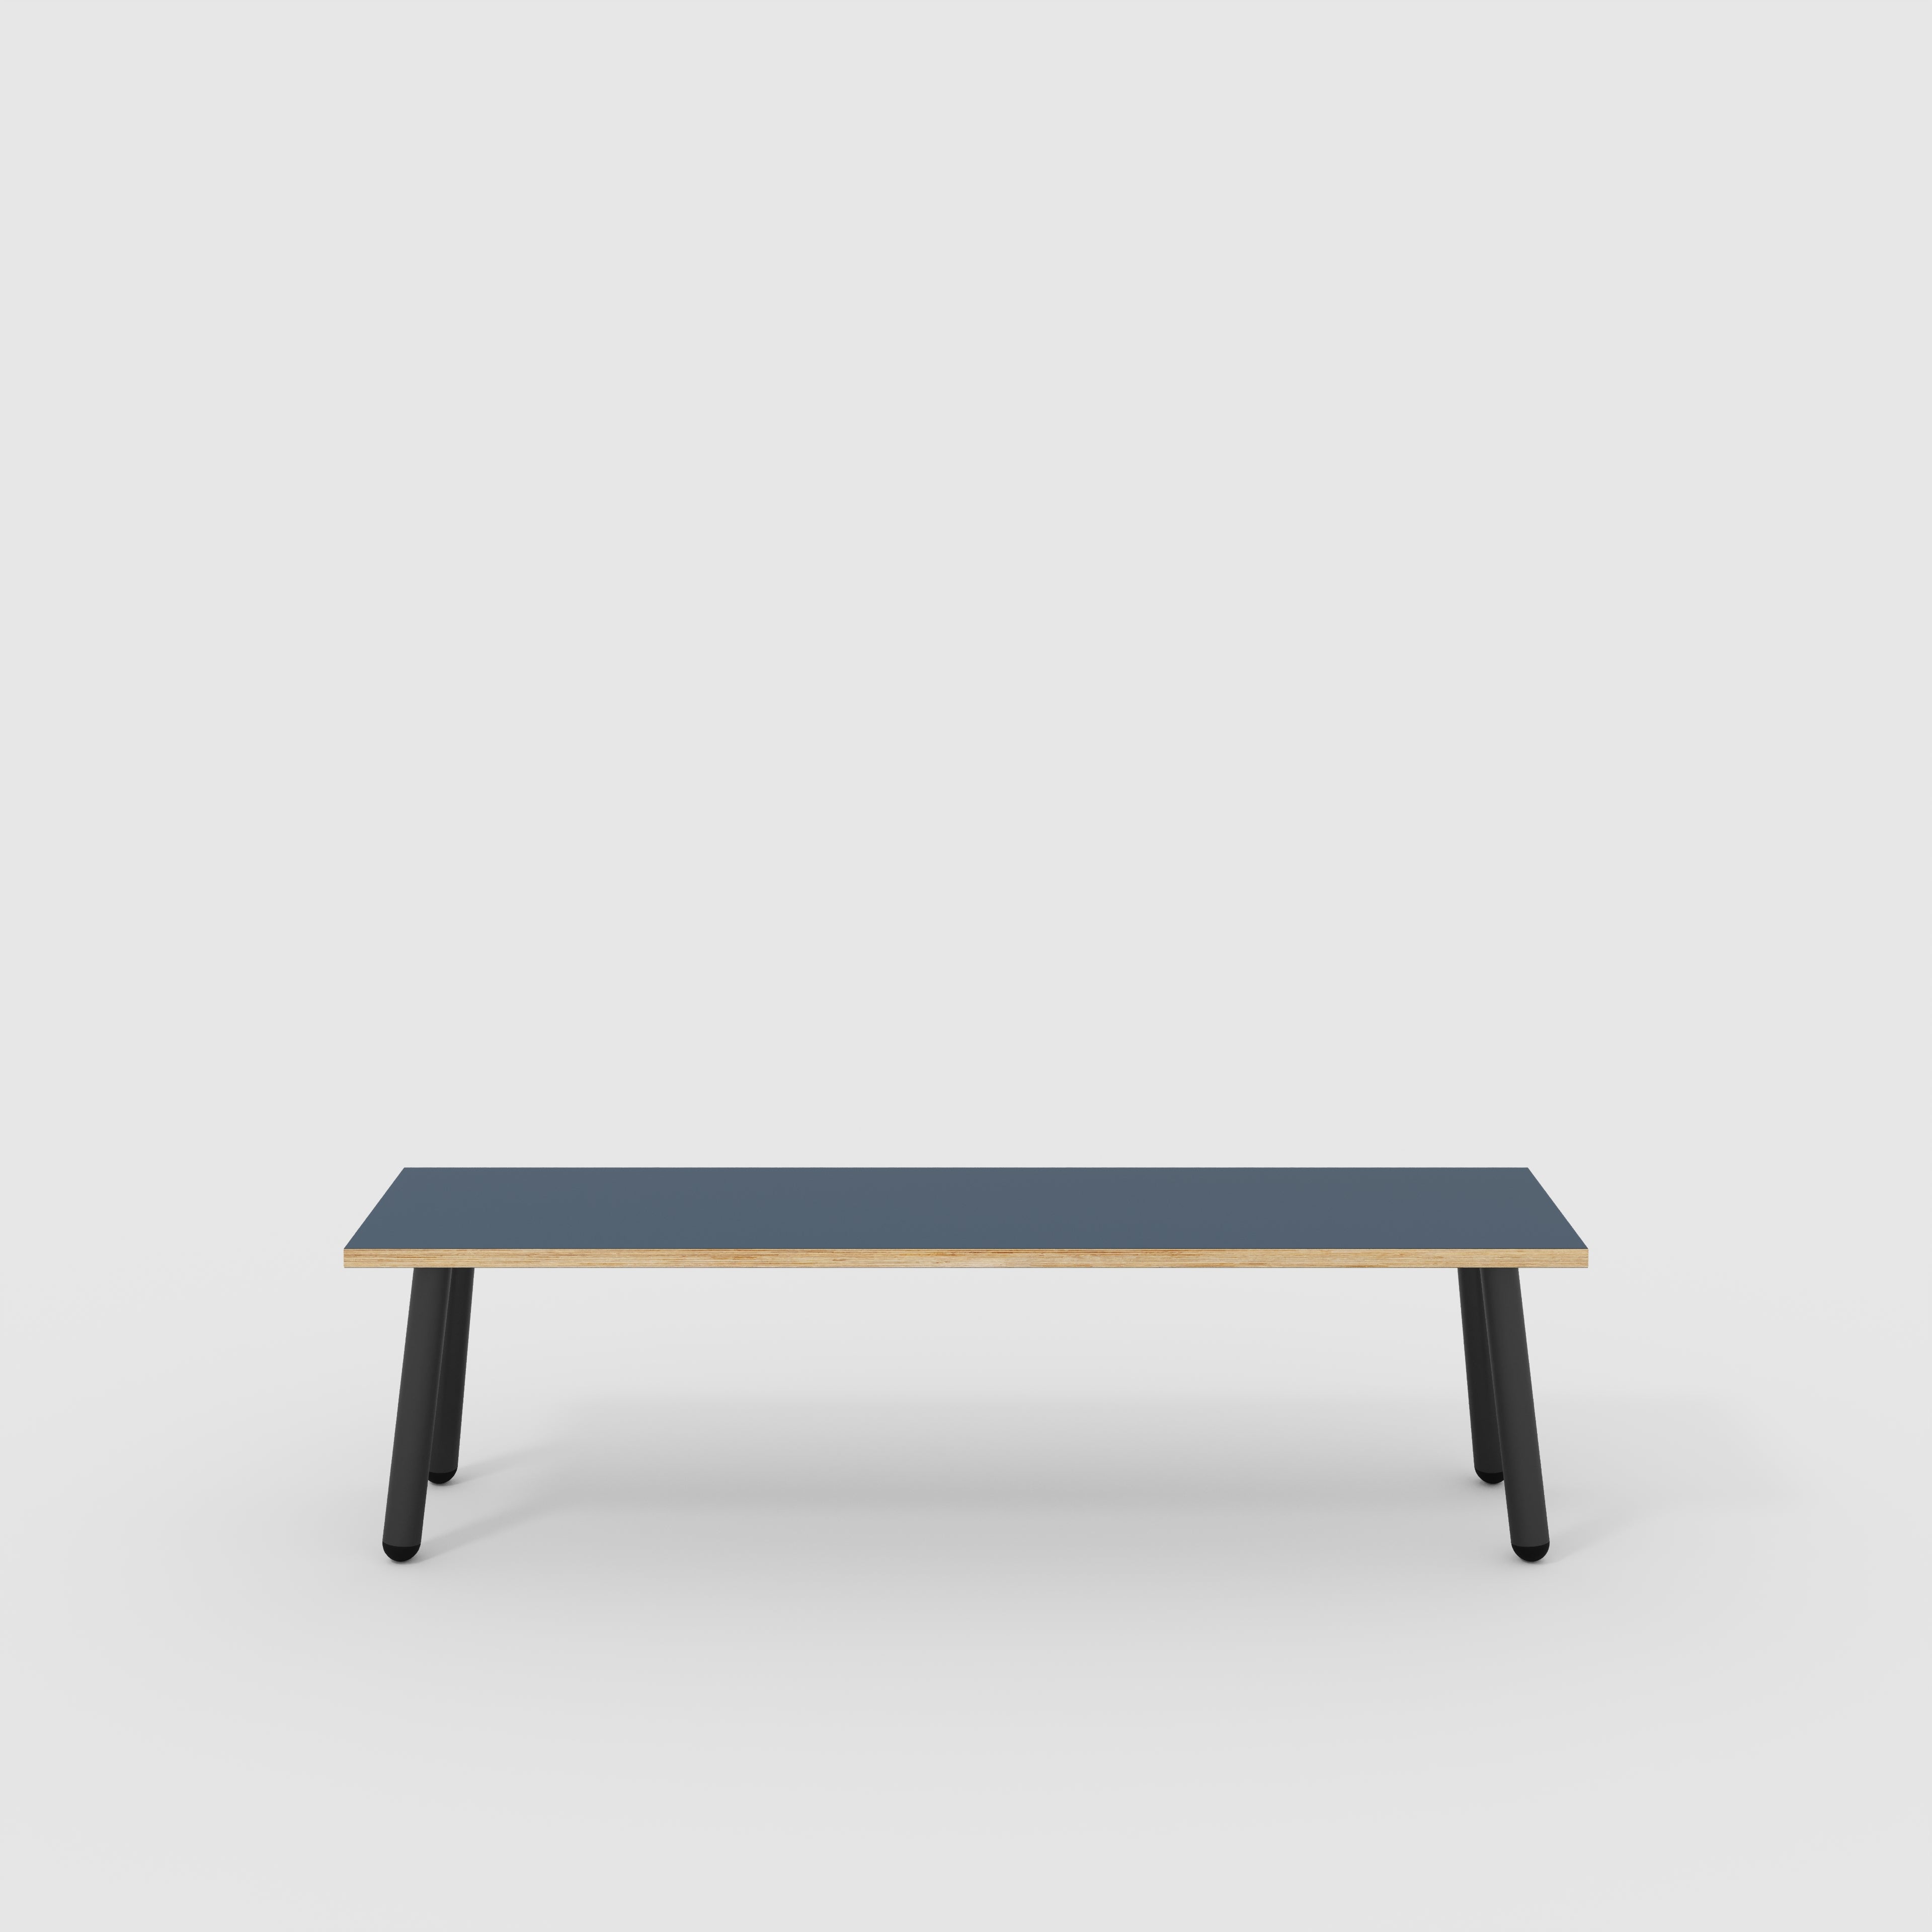 Bench Seat with Black Round Single Pin Legs - Formica Night Sea Blue - 1600(w) x 400(d)